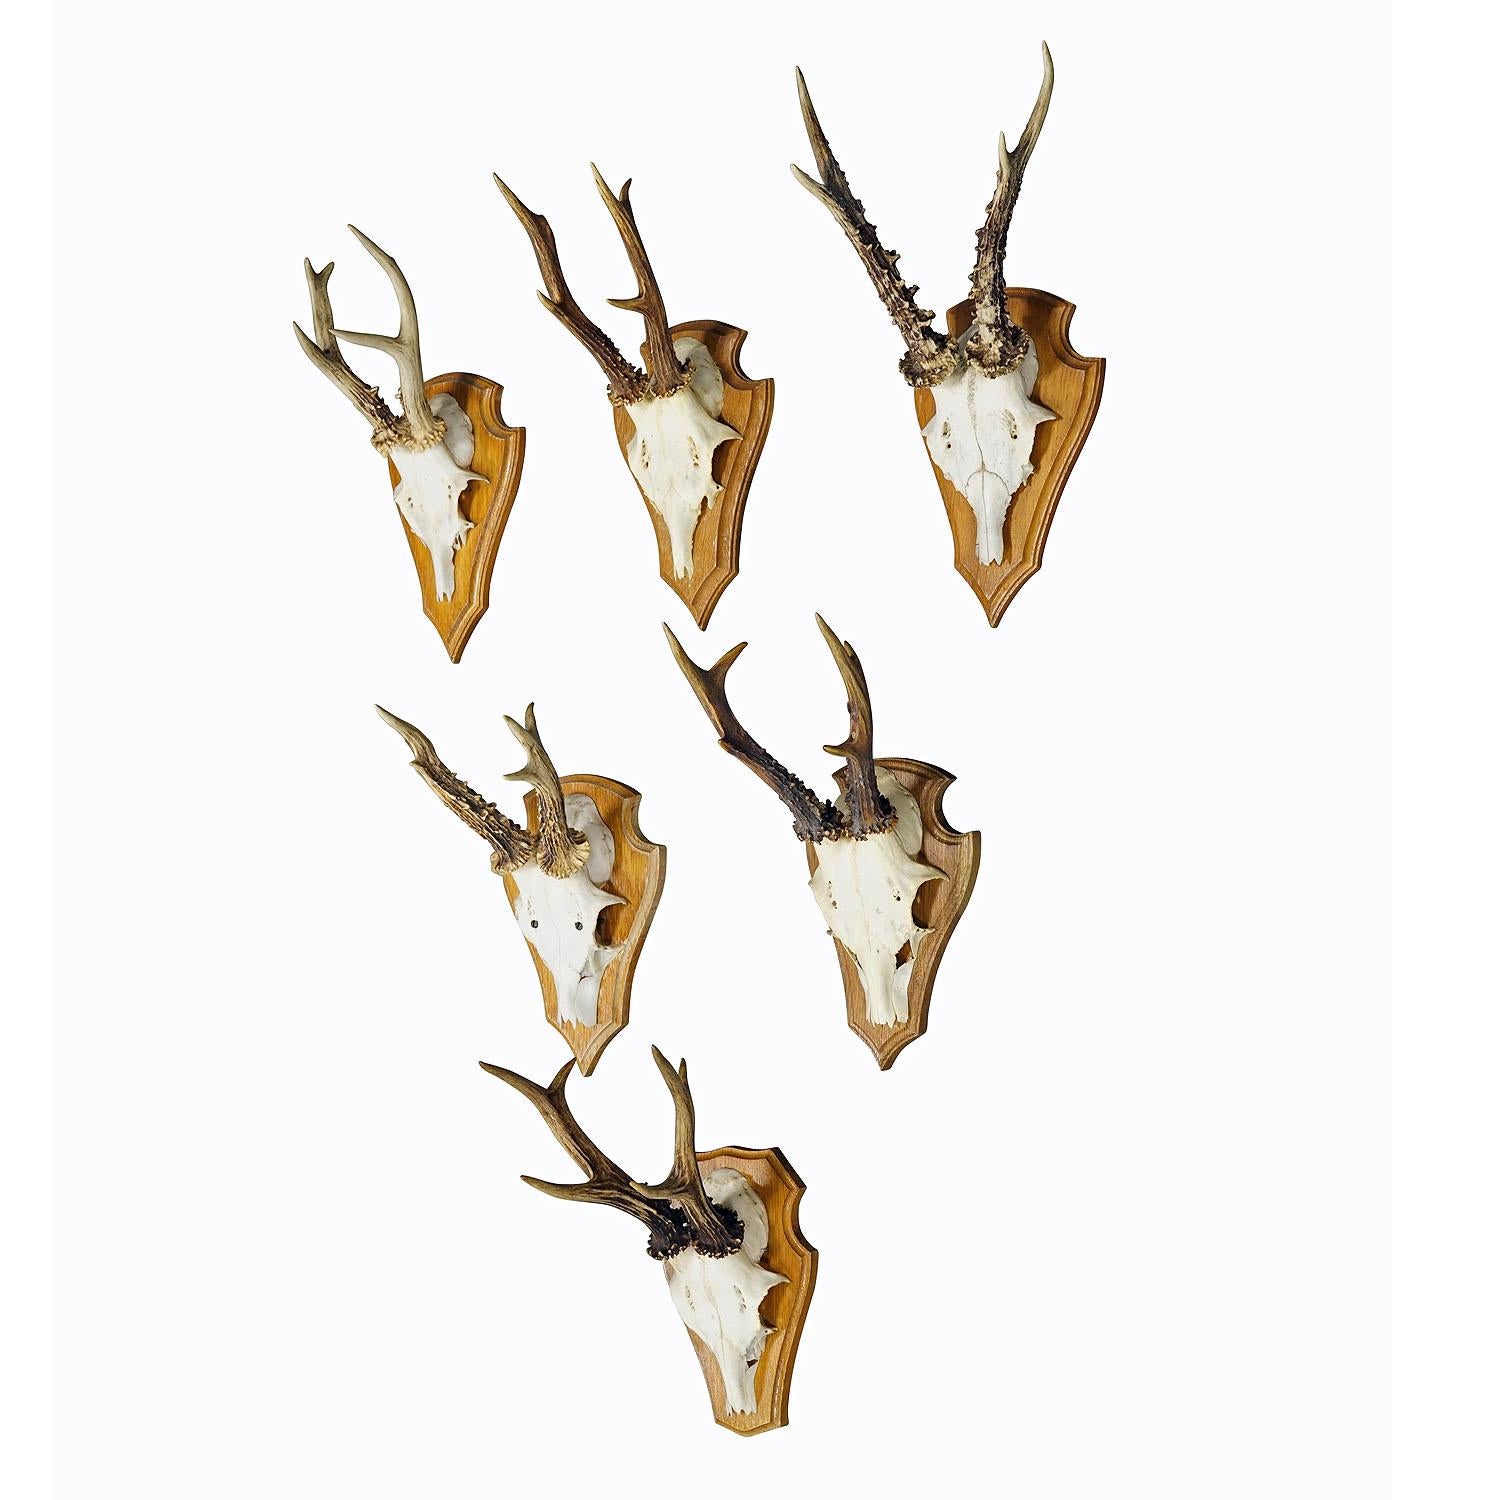 Six Large Roe Deer Trophies on Wooden Plaques Germany Late 20. Century

A set of six large Black Forest roe deer (Capreolus capreolus) trophies mounted on wooden plaques. The trophies were shot in Germany in the late 20th century. A great addition